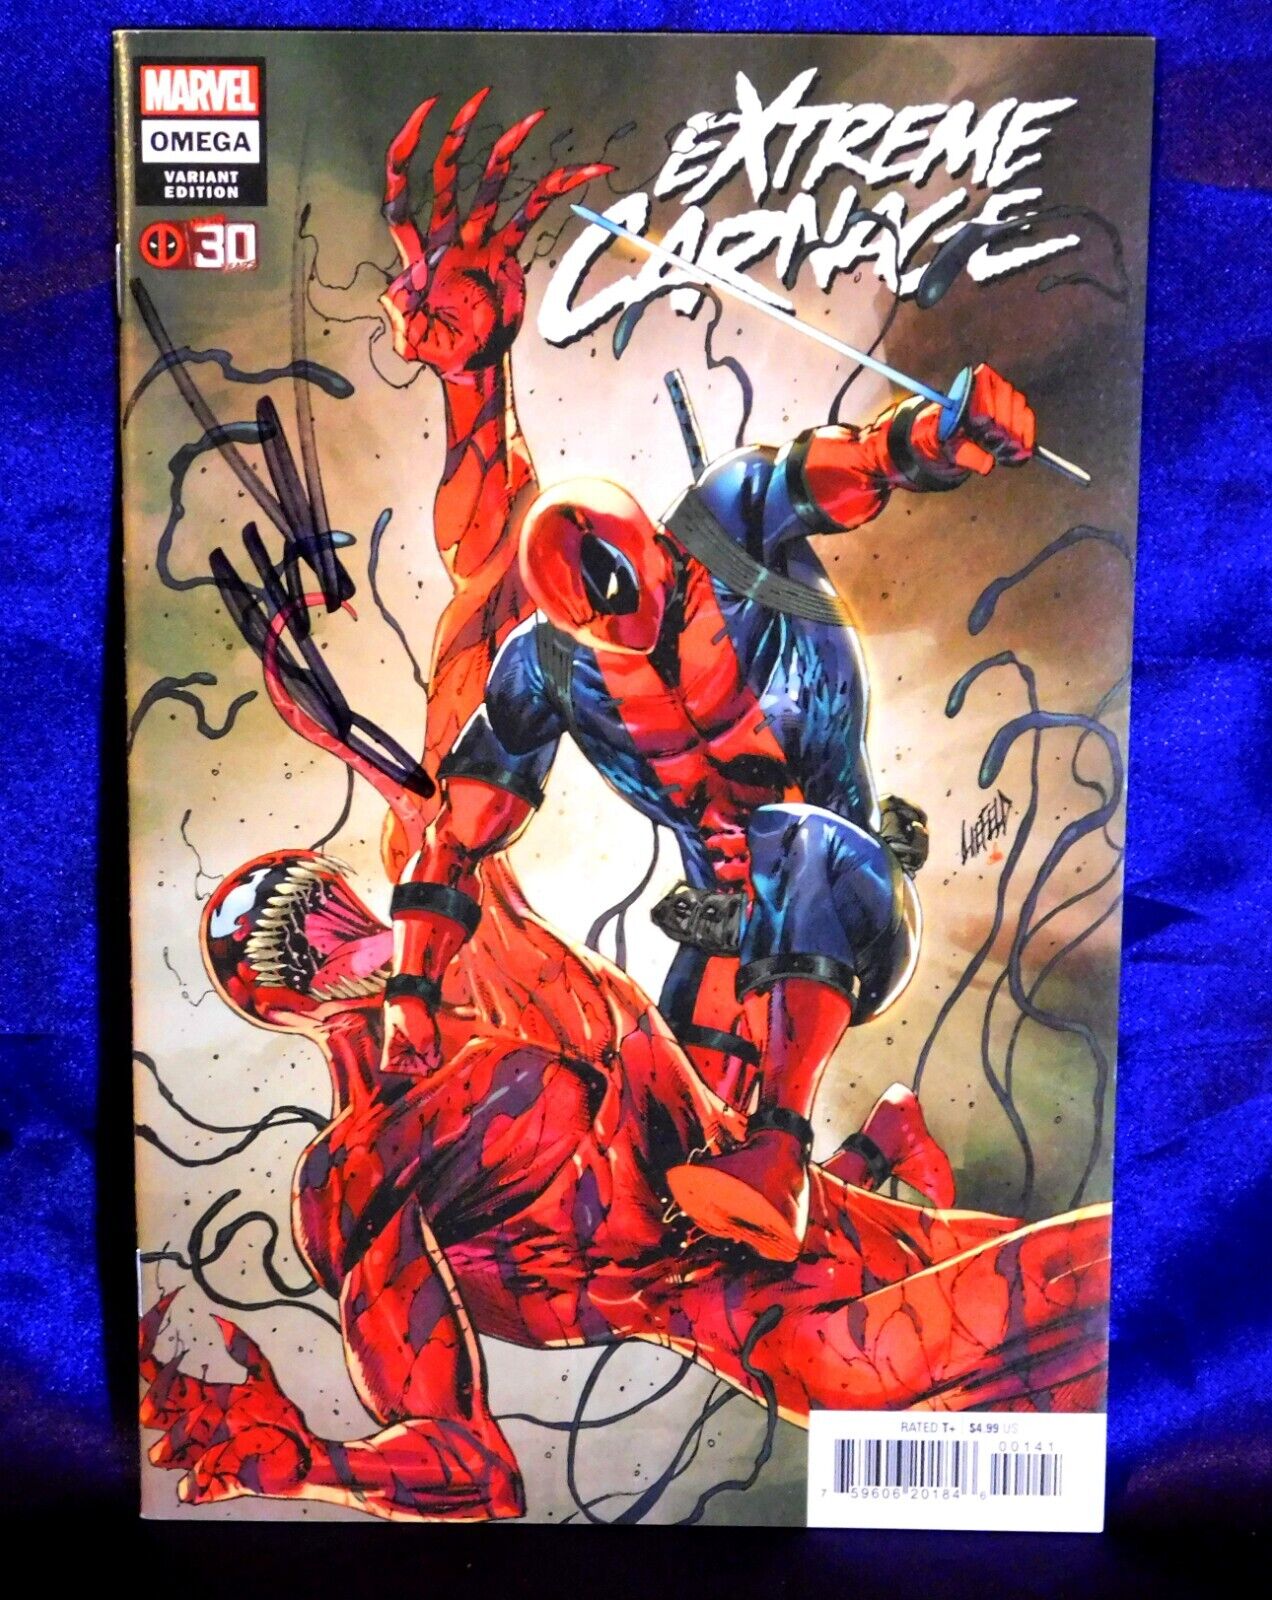 EXTREME CARNAGE OMEGA #1 DEADPOOL VARIANT EDITION SIGNED BY ARTIST ROB LIEFELD